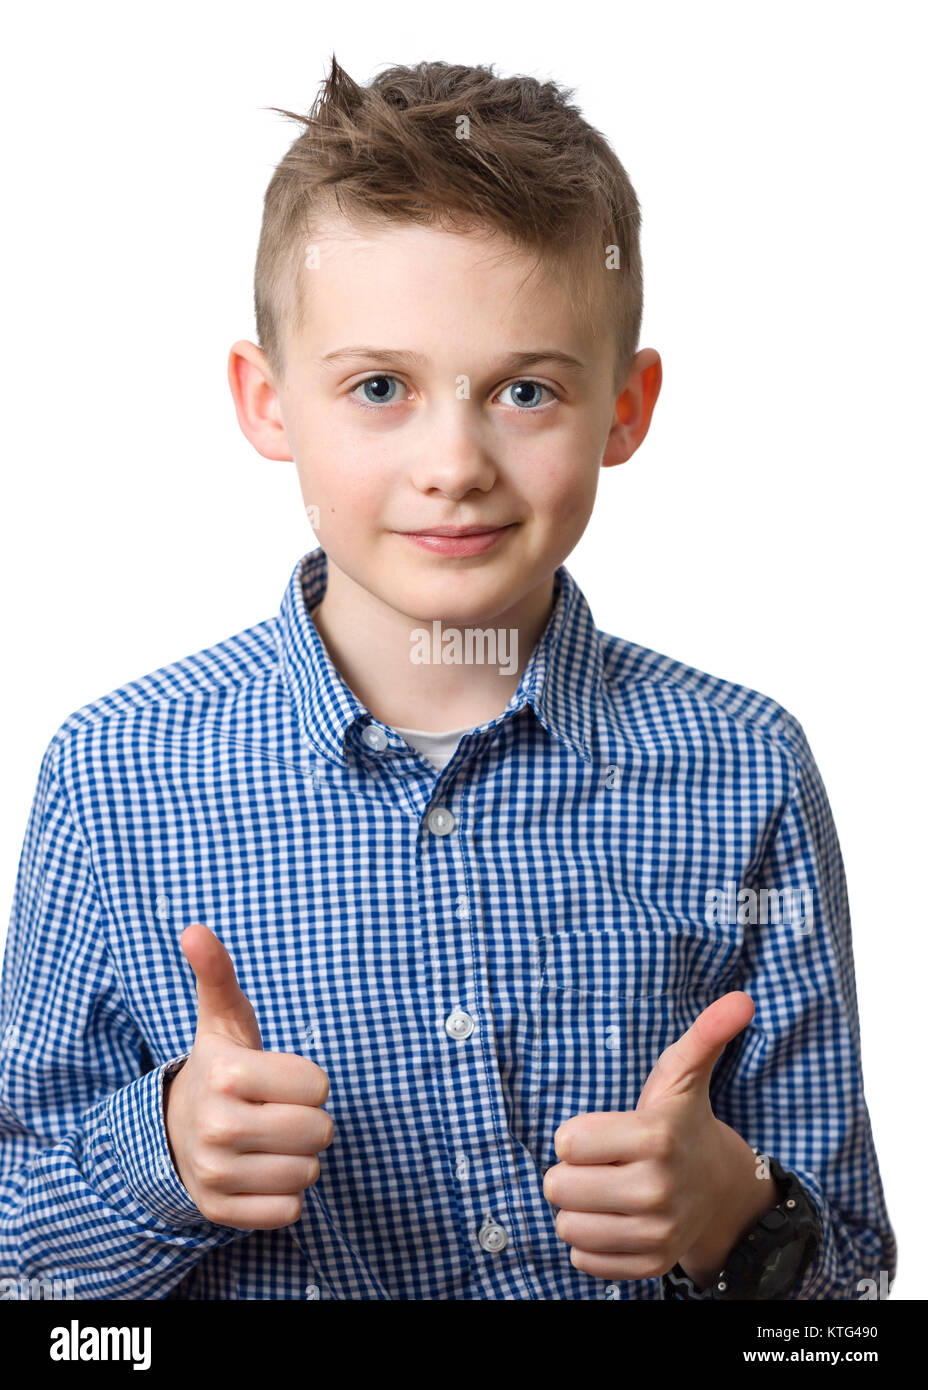 Young caucasian boy doing thumbs up gesture head and shoulder portrait isolated on white background  Model Release: Yes.  Property Release: No. Stock Photo